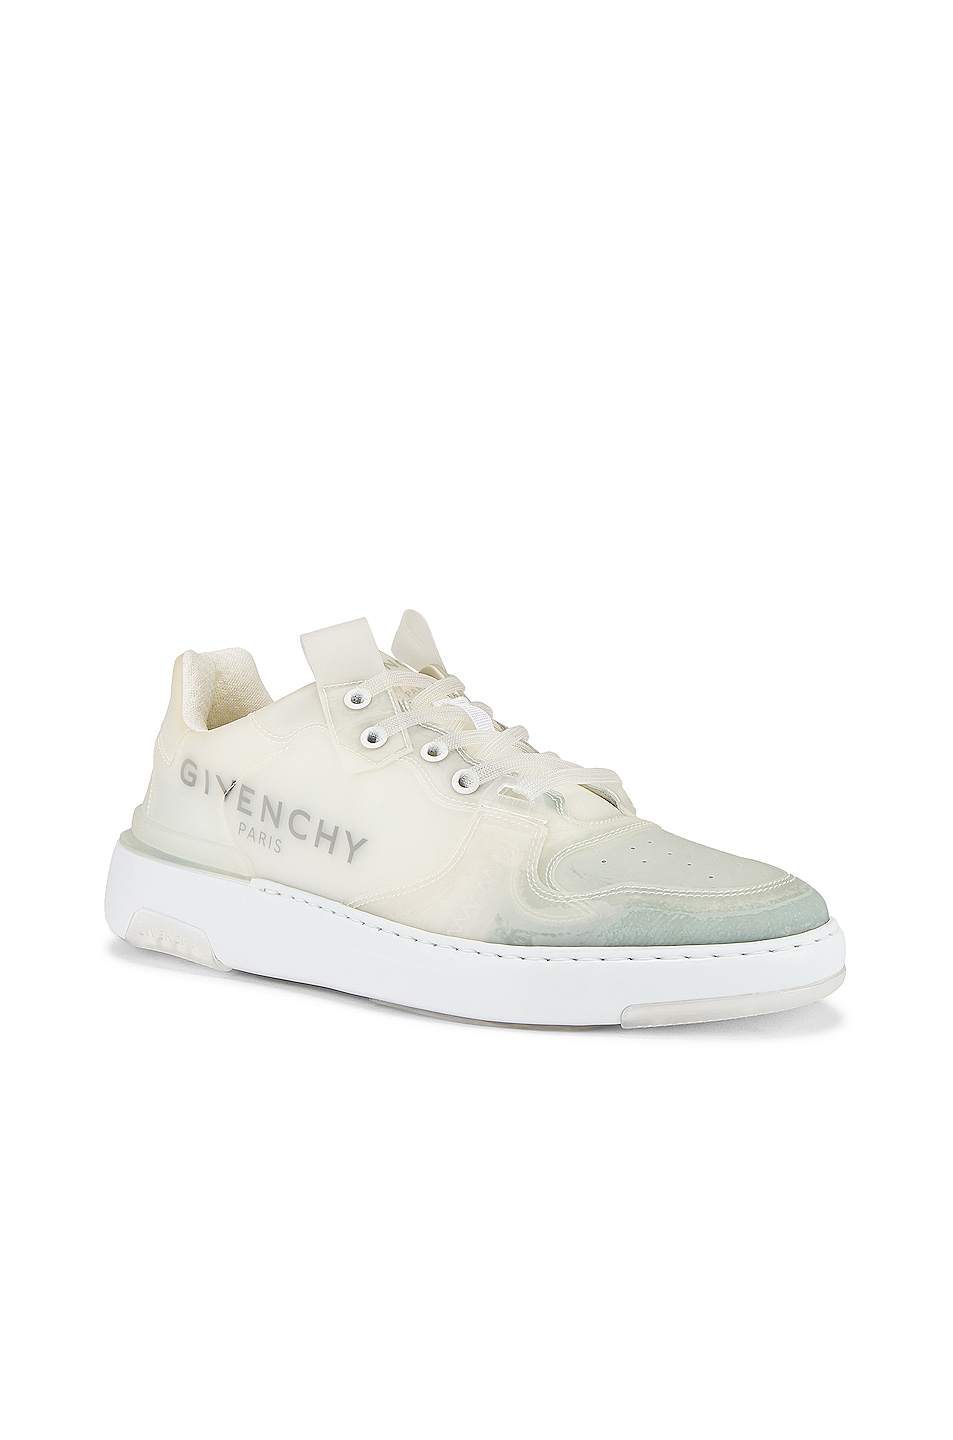 Image 1 of Givenchy Wing Low Top Sneaker in White